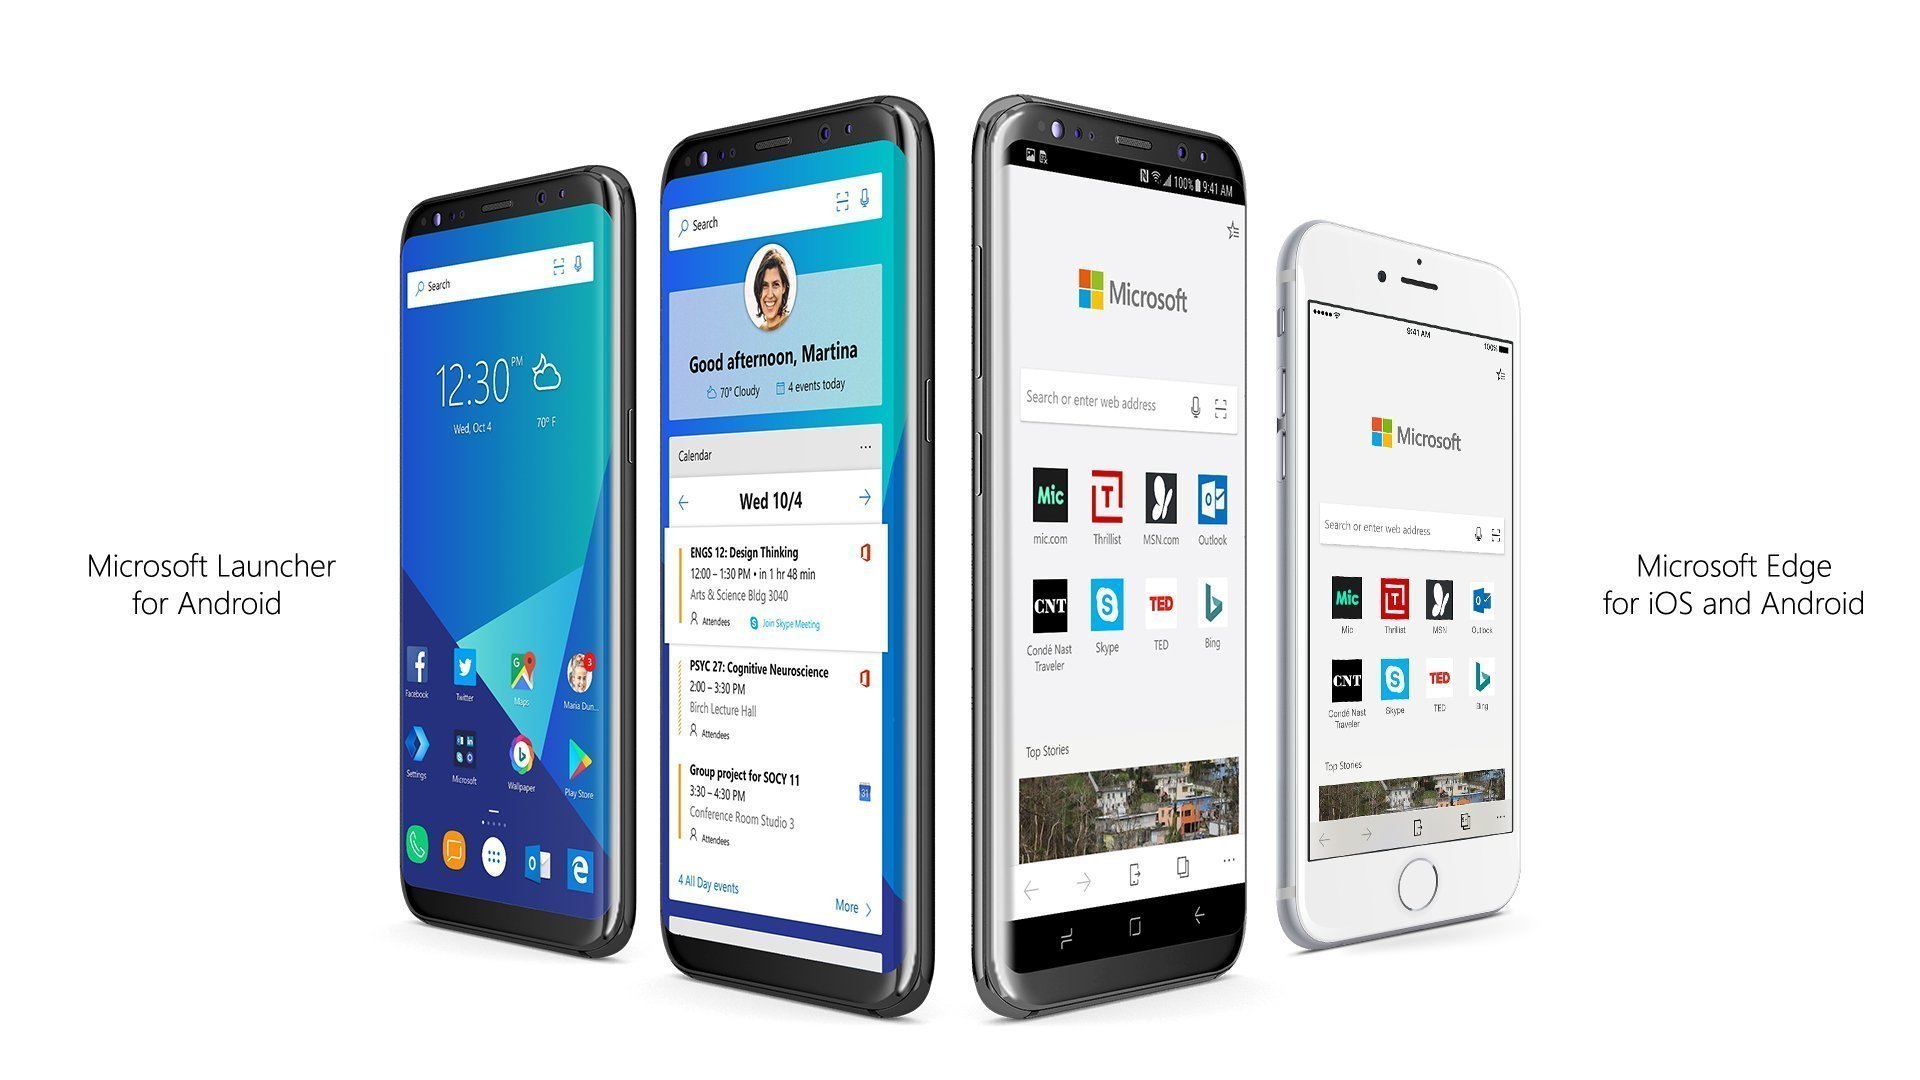 Microsoft Launcher on your child's Android device, DEVICENAME, needs attention. caaf609f6273fcc3e9545708498dcded.jpg